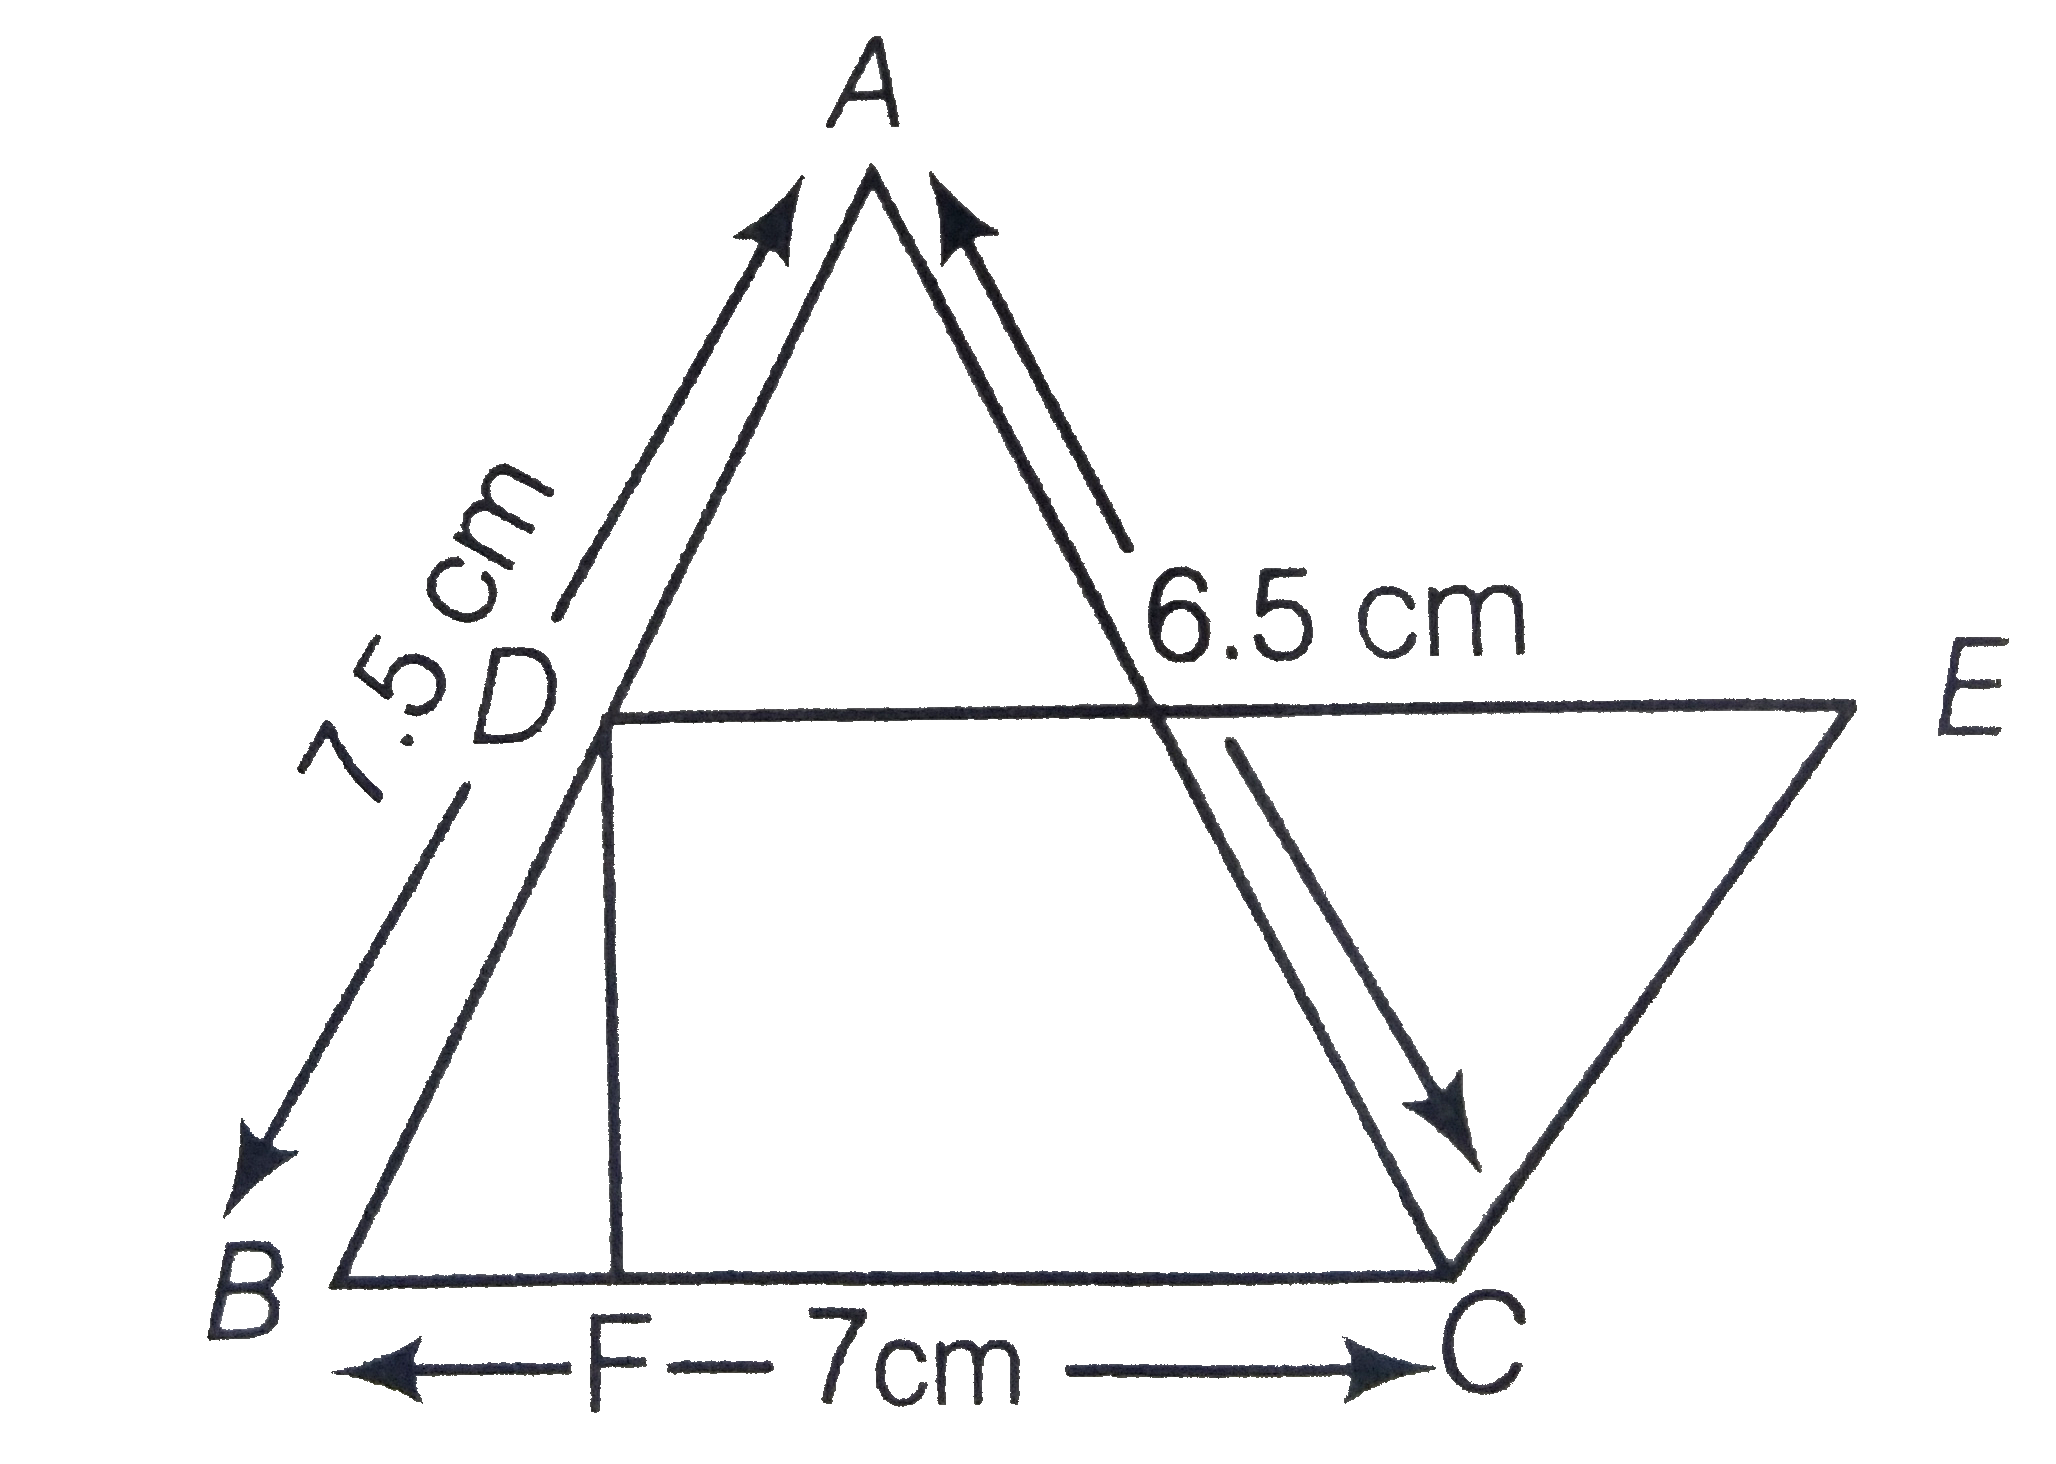 In figure, triangleABC has sides AB = 7.5 cm, AC = 6.5 cm and BC=7 cm. On base BC a parallelogram DBCE of same area as that of triangle ABC is constructed. Find the height DF of the parallelogram.